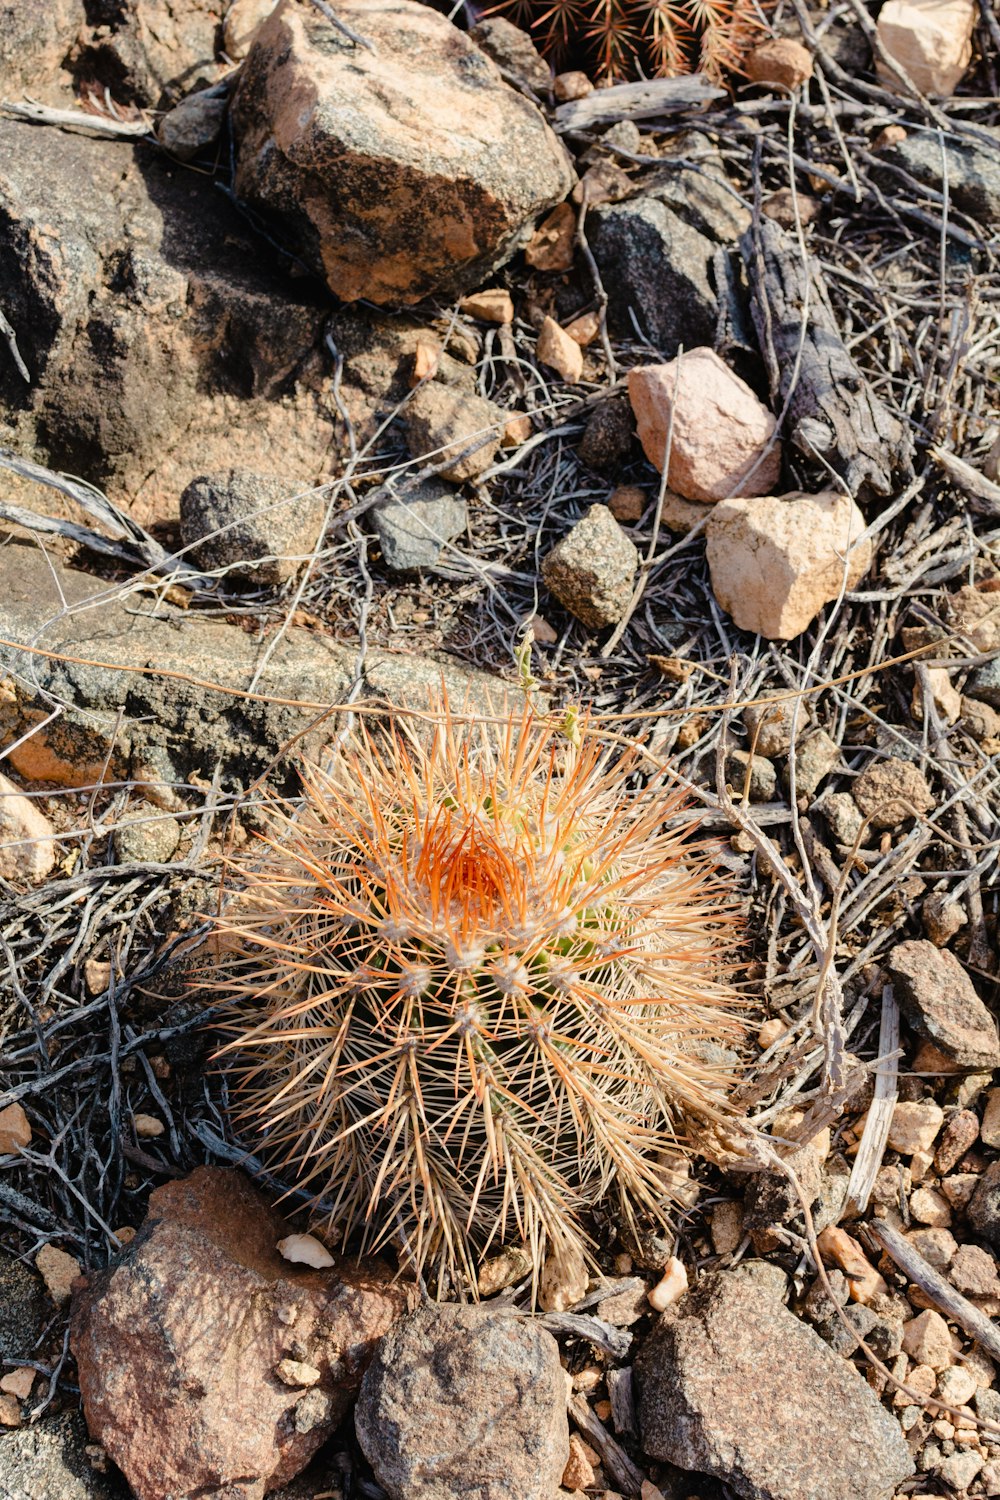 a small cactus in the middle of a rocky area